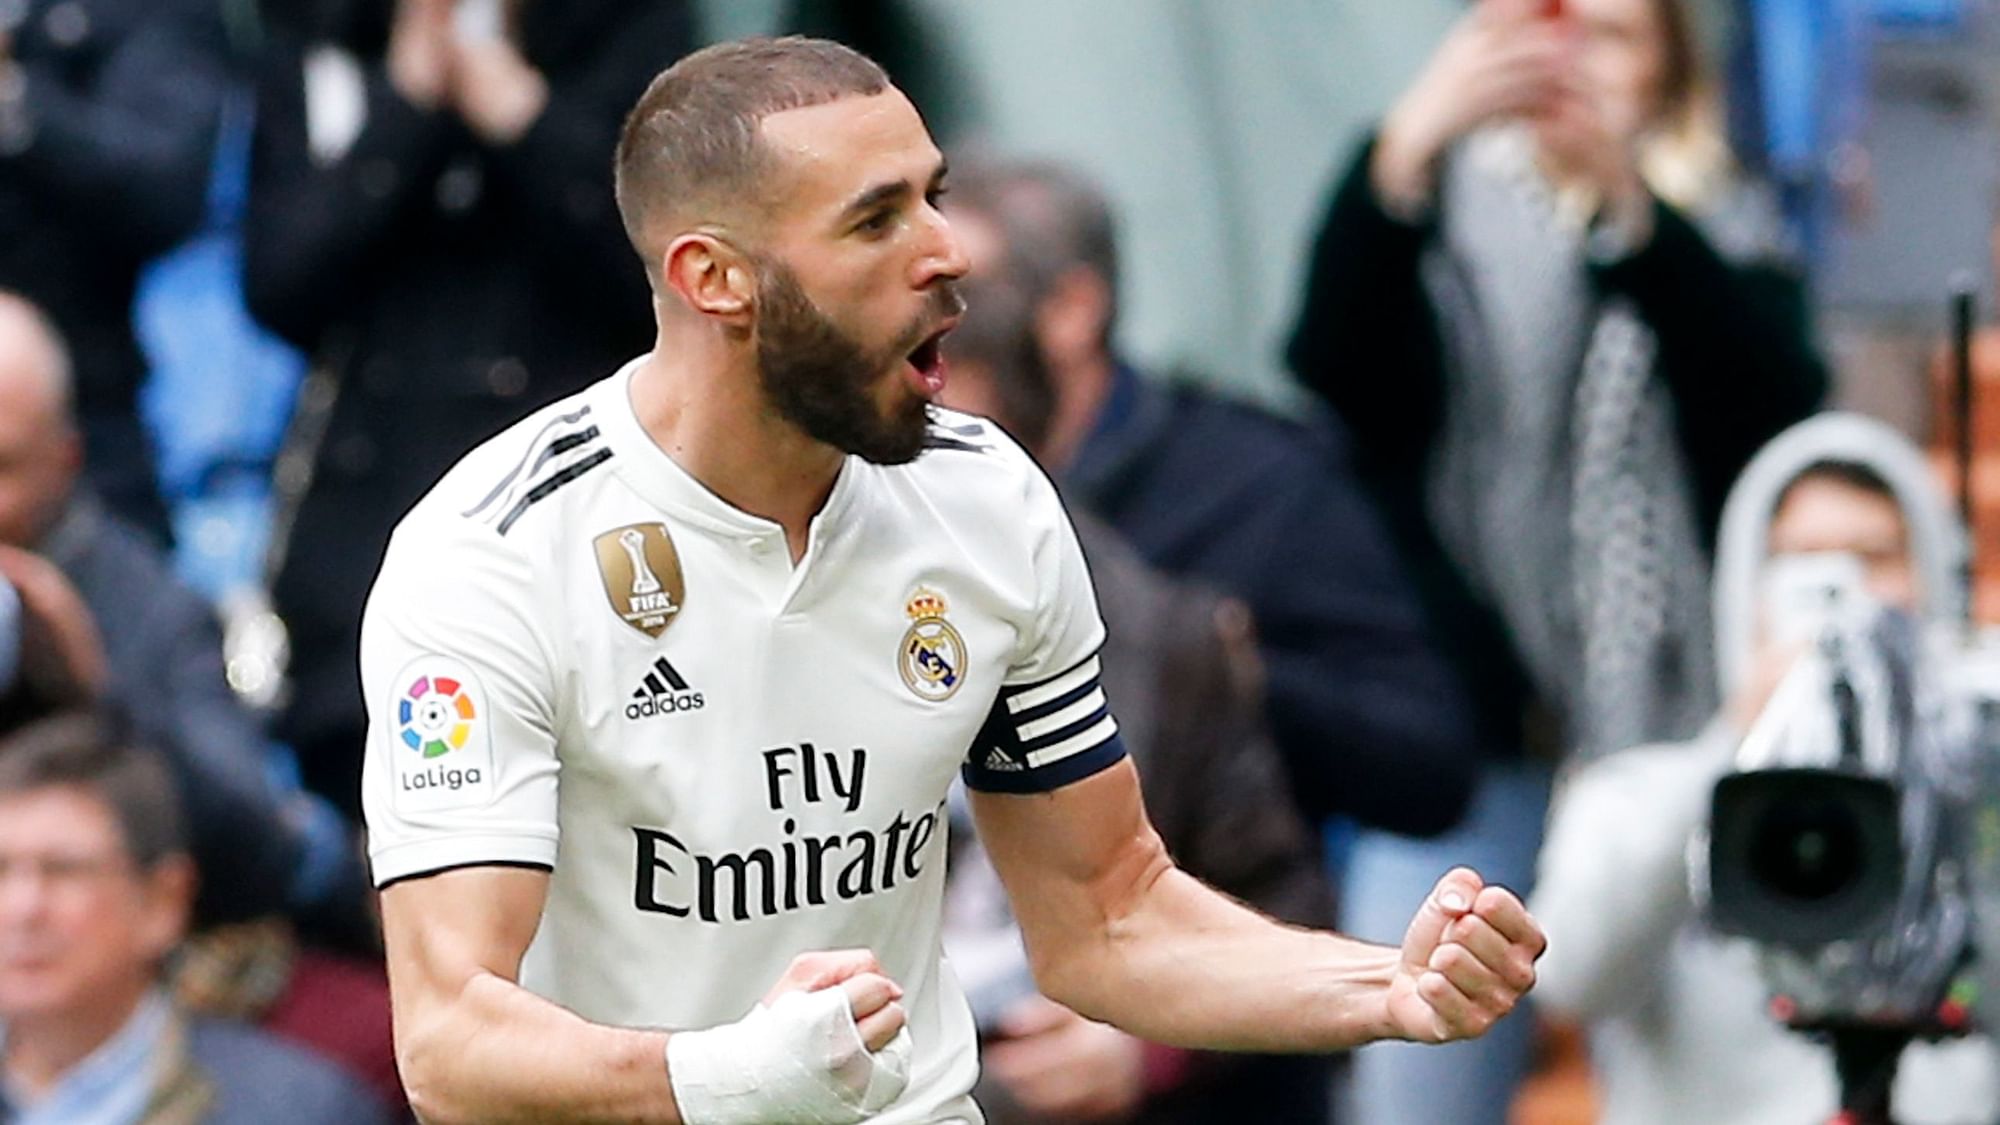 Real Madrid’s Karim Benzema celebrates after he scored his side’s second goal during a Spanish La Liga soccer match between Real Madrid and Eibar at the Santiago Bernabeu stadium in Madrid, Spain, Saturday April 6, 2019.&nbsp;